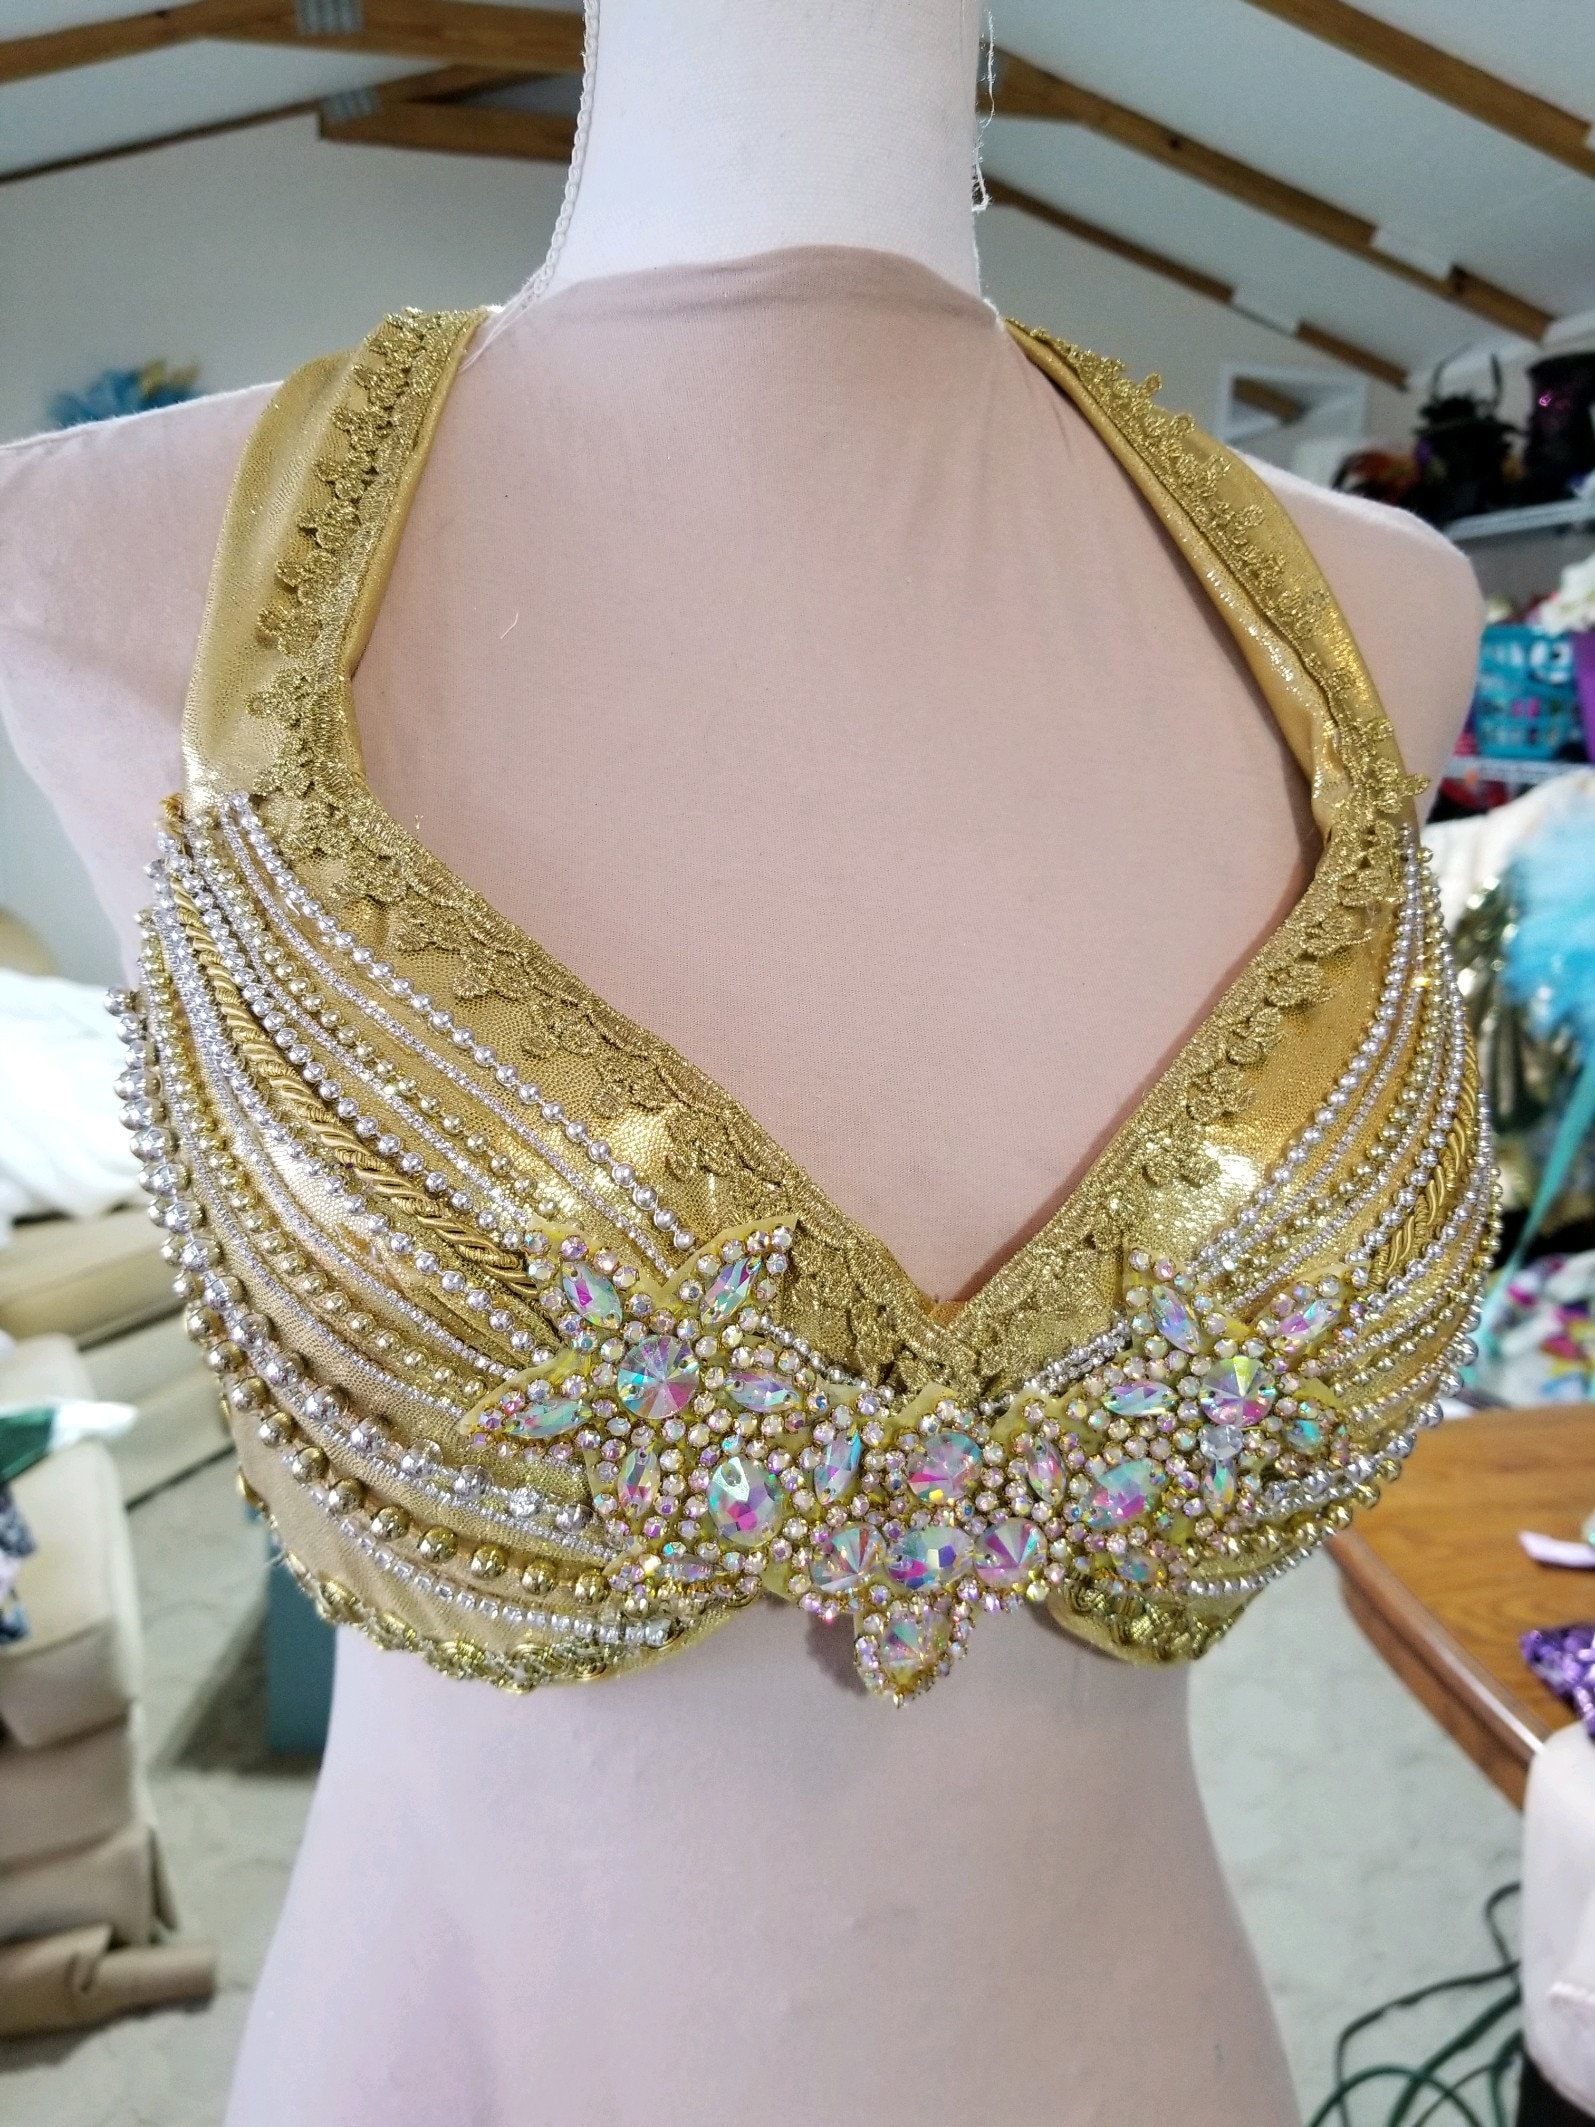 Gold lame bedazzled bra